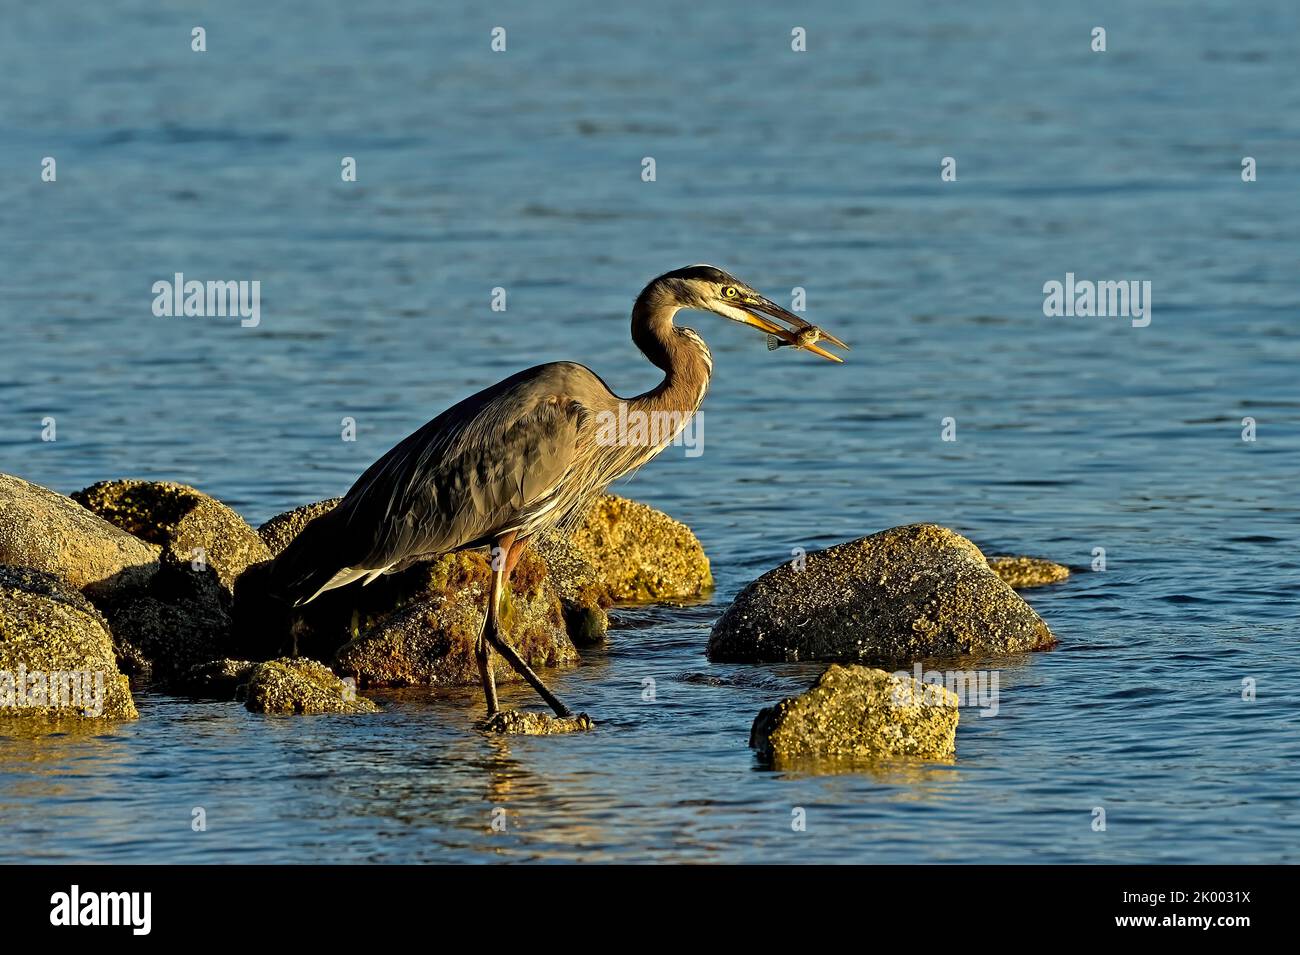 A Great Blue Heron  (Ardea herodias) with a caught fish on the shore on Vancouver Island in British Columbia Canada. Stock Photo